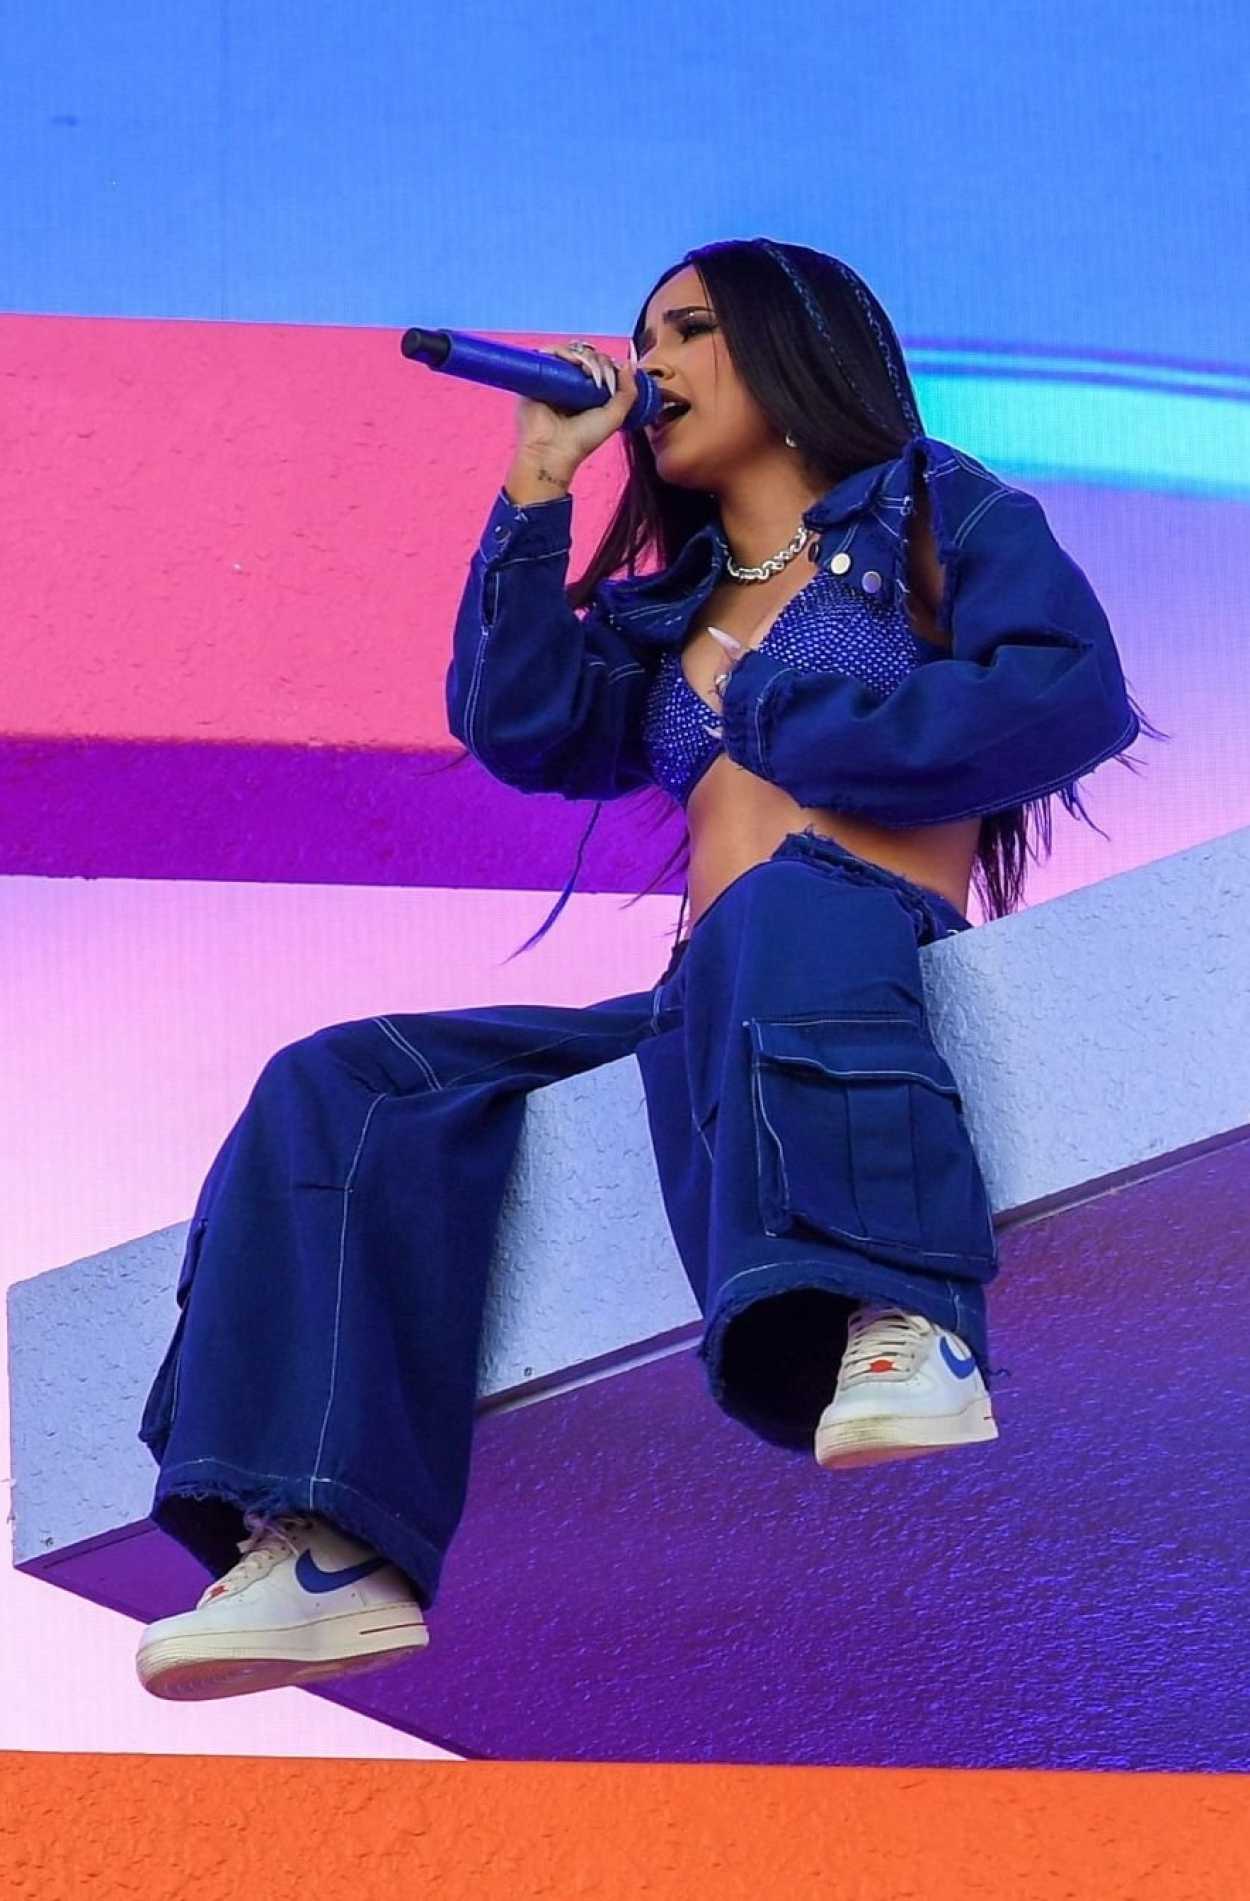 Becky G Performs at the Coachella Valley Music and Arts Festival in